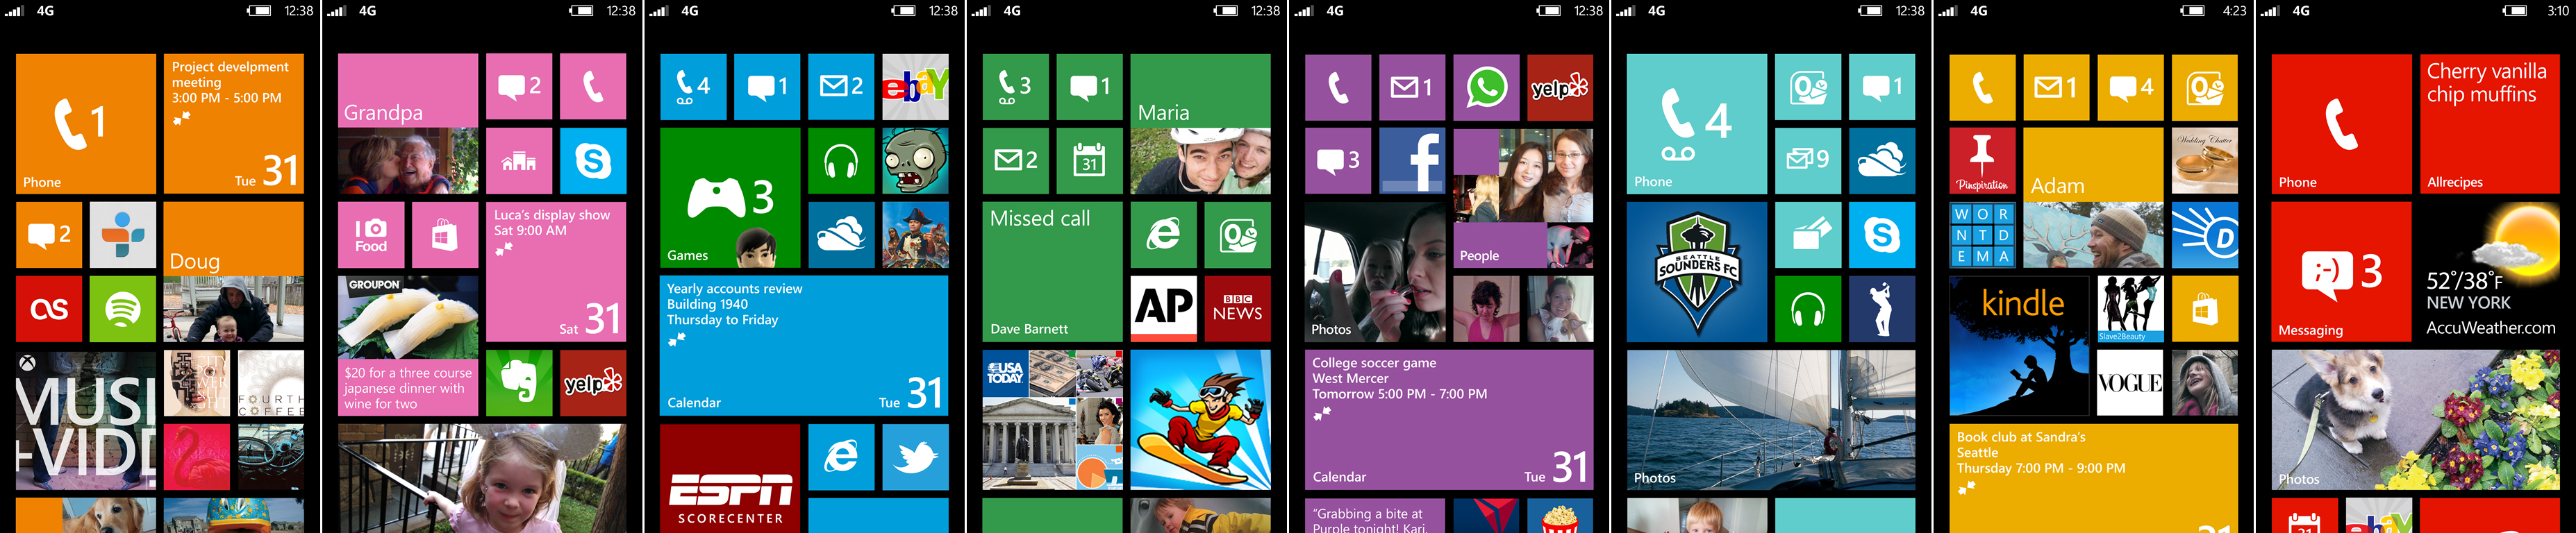 Image Windows Phone Start Screen Apps Pc Android iPhone